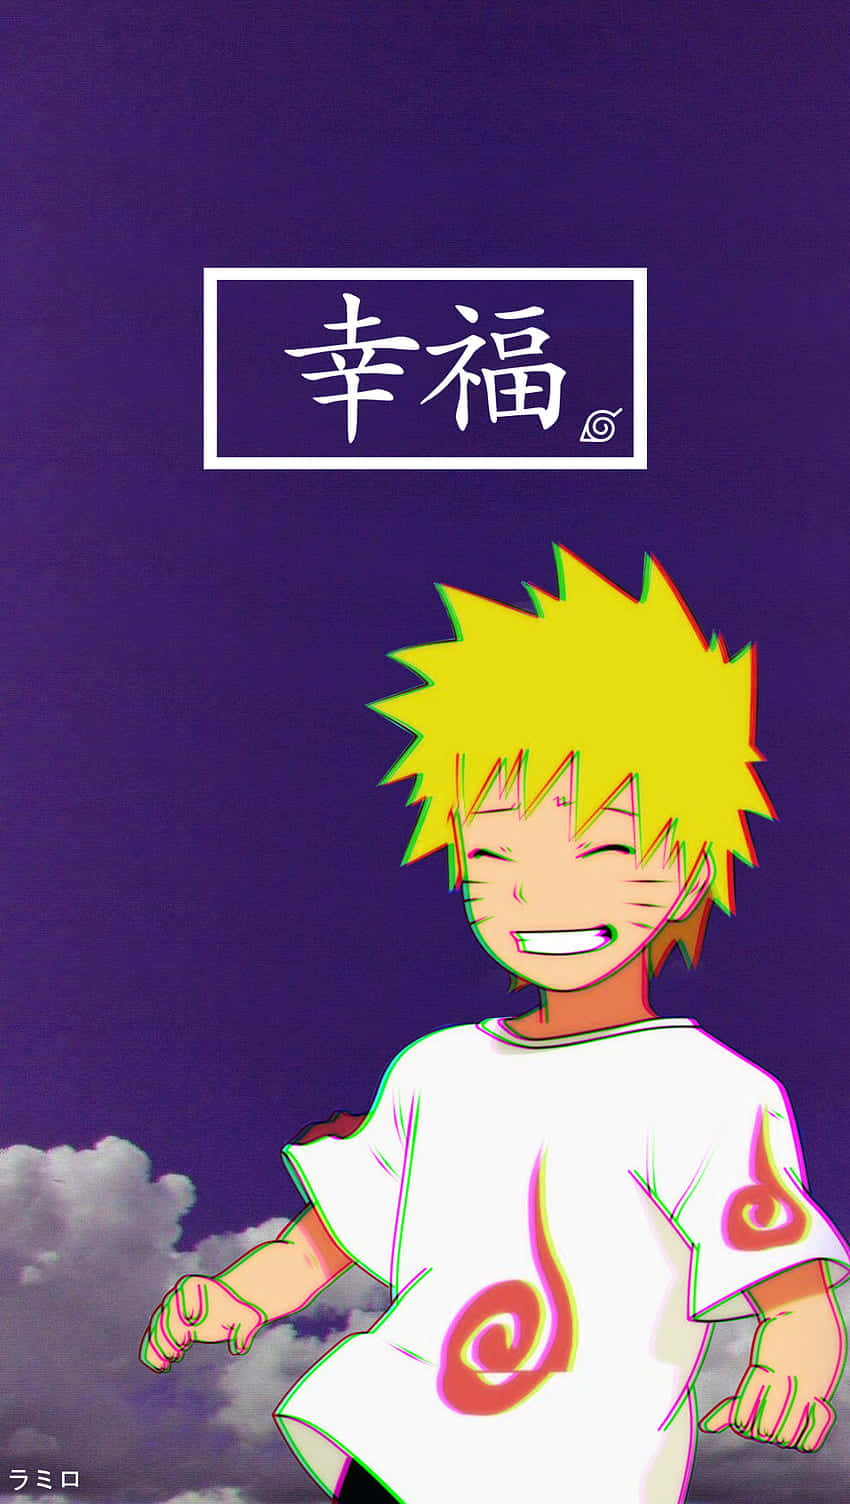 Download Stay productive while enjoying a Naruto-themed desktop background  Wallpaper | Wallpapers.com